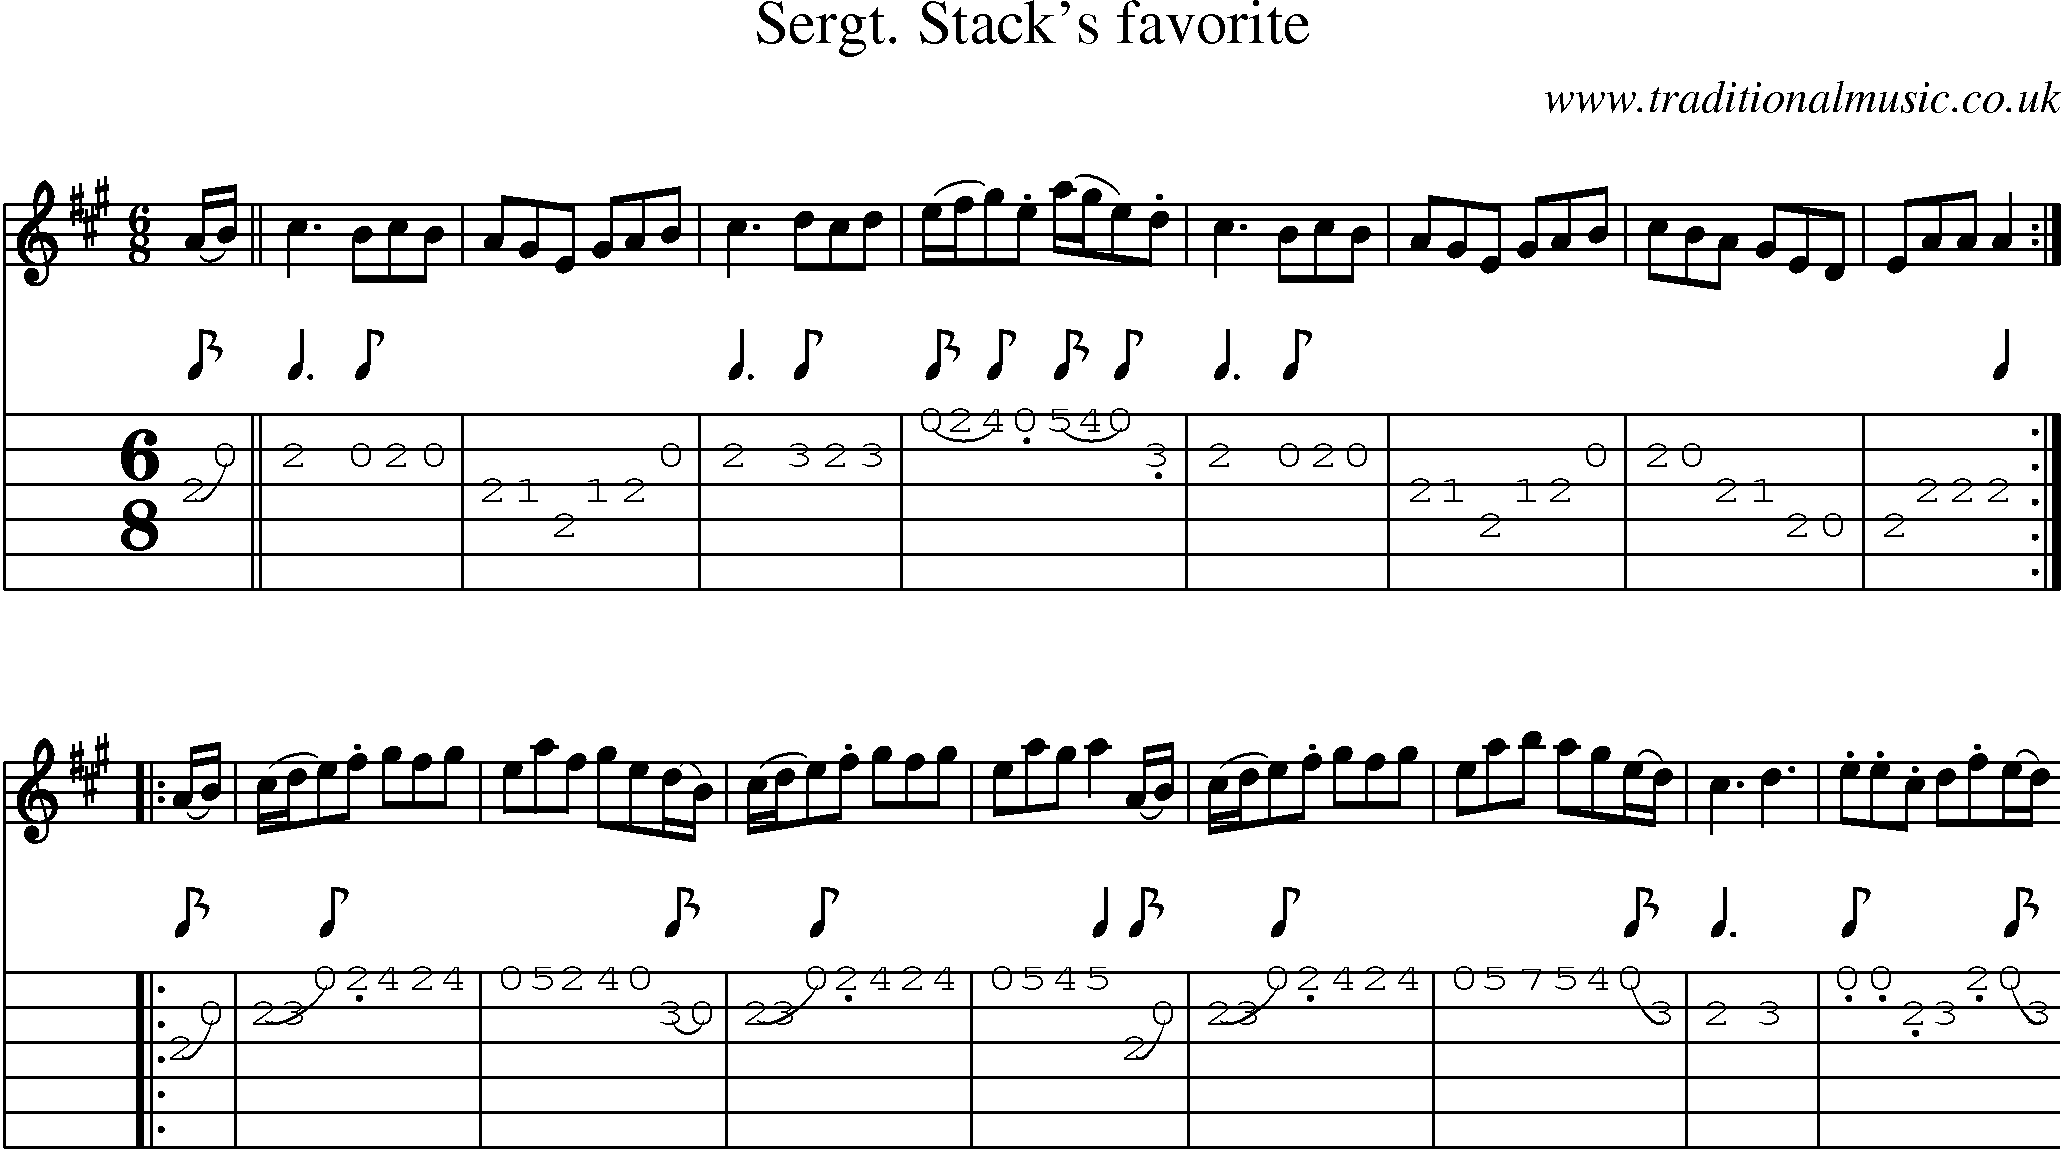 Music Score and Guitar Tabs for Sergt Stacks Favorite